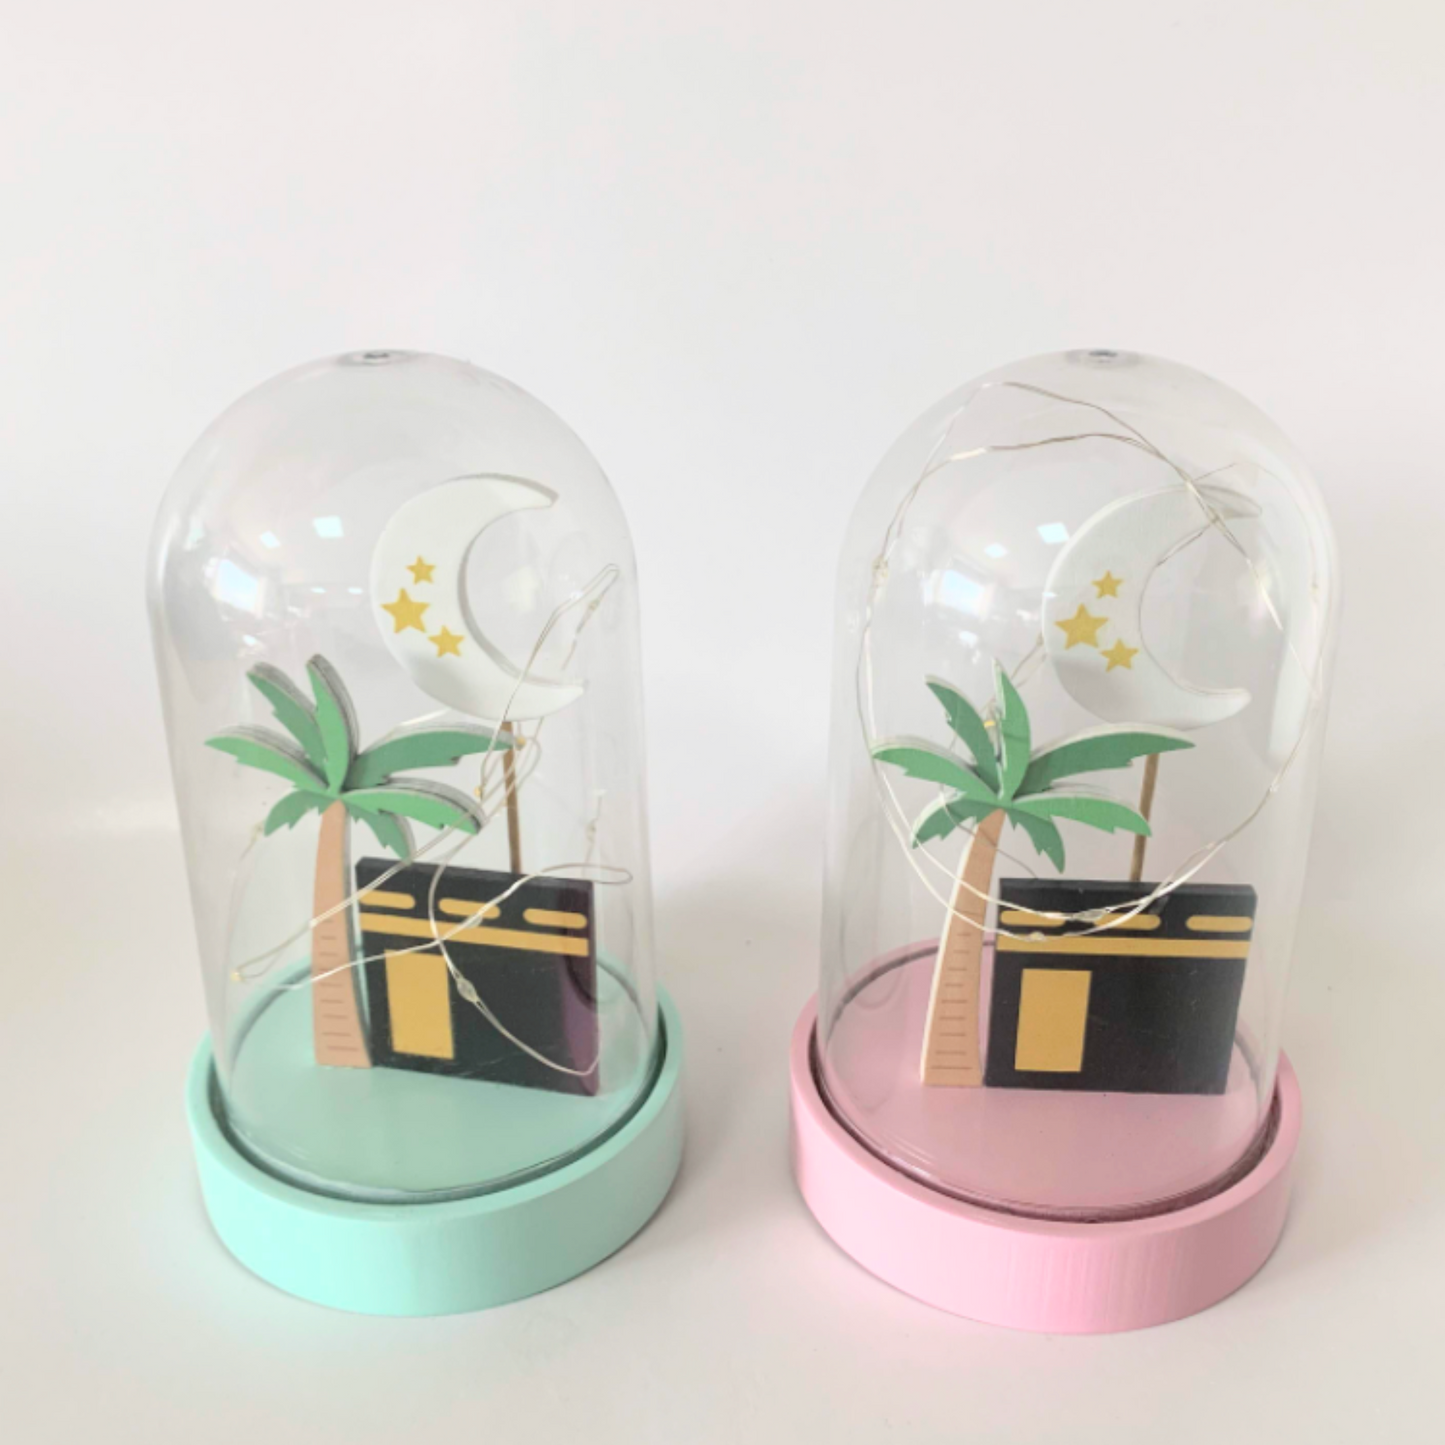 Kaba Light Up Dome- Blue green/Pink